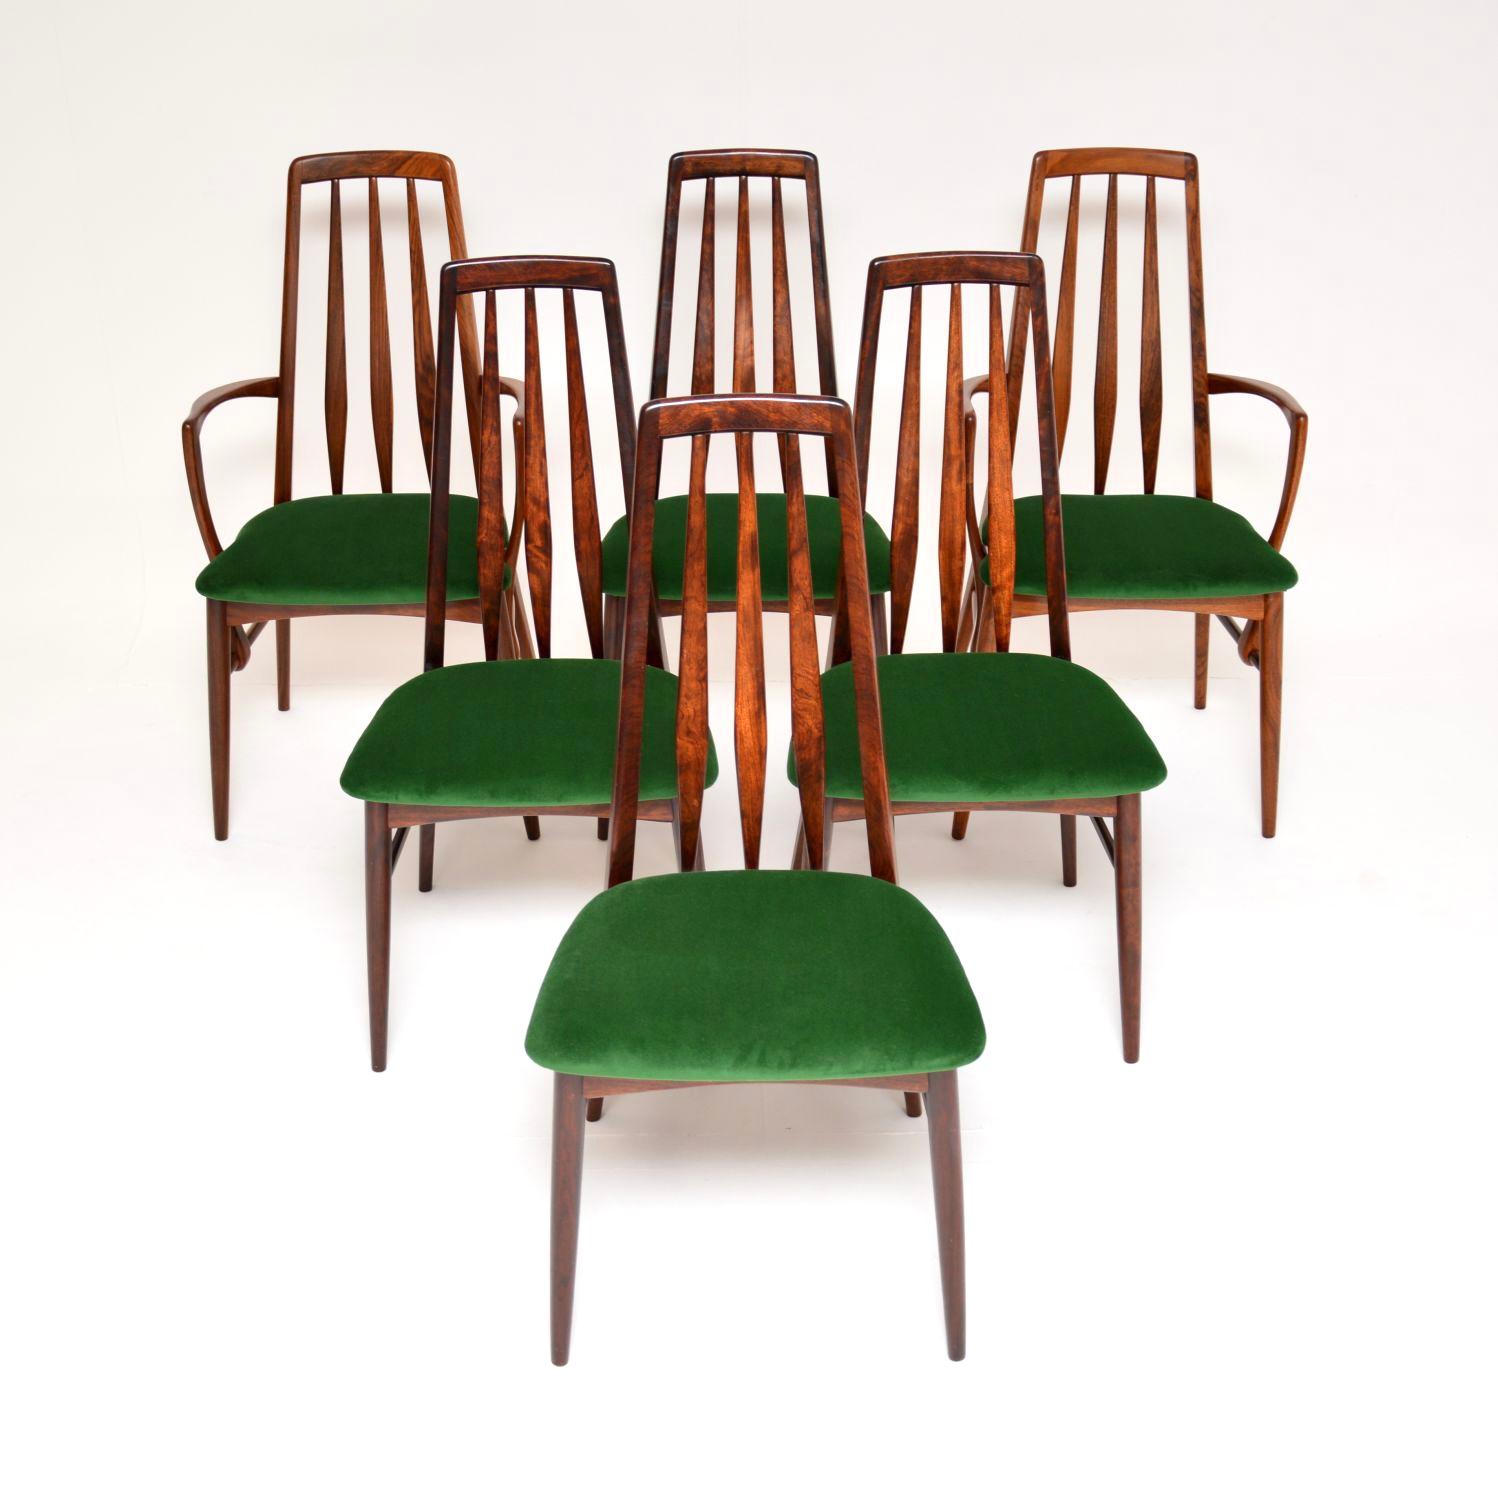 A stunning set of six Danish “Eva” dining chairs, these were designed by Niels Koefoed. They date from the 1960’s and were made by Koefoeds Hornslet.

We have had these fully restored and they are in absolutely immaculate condition. The frames